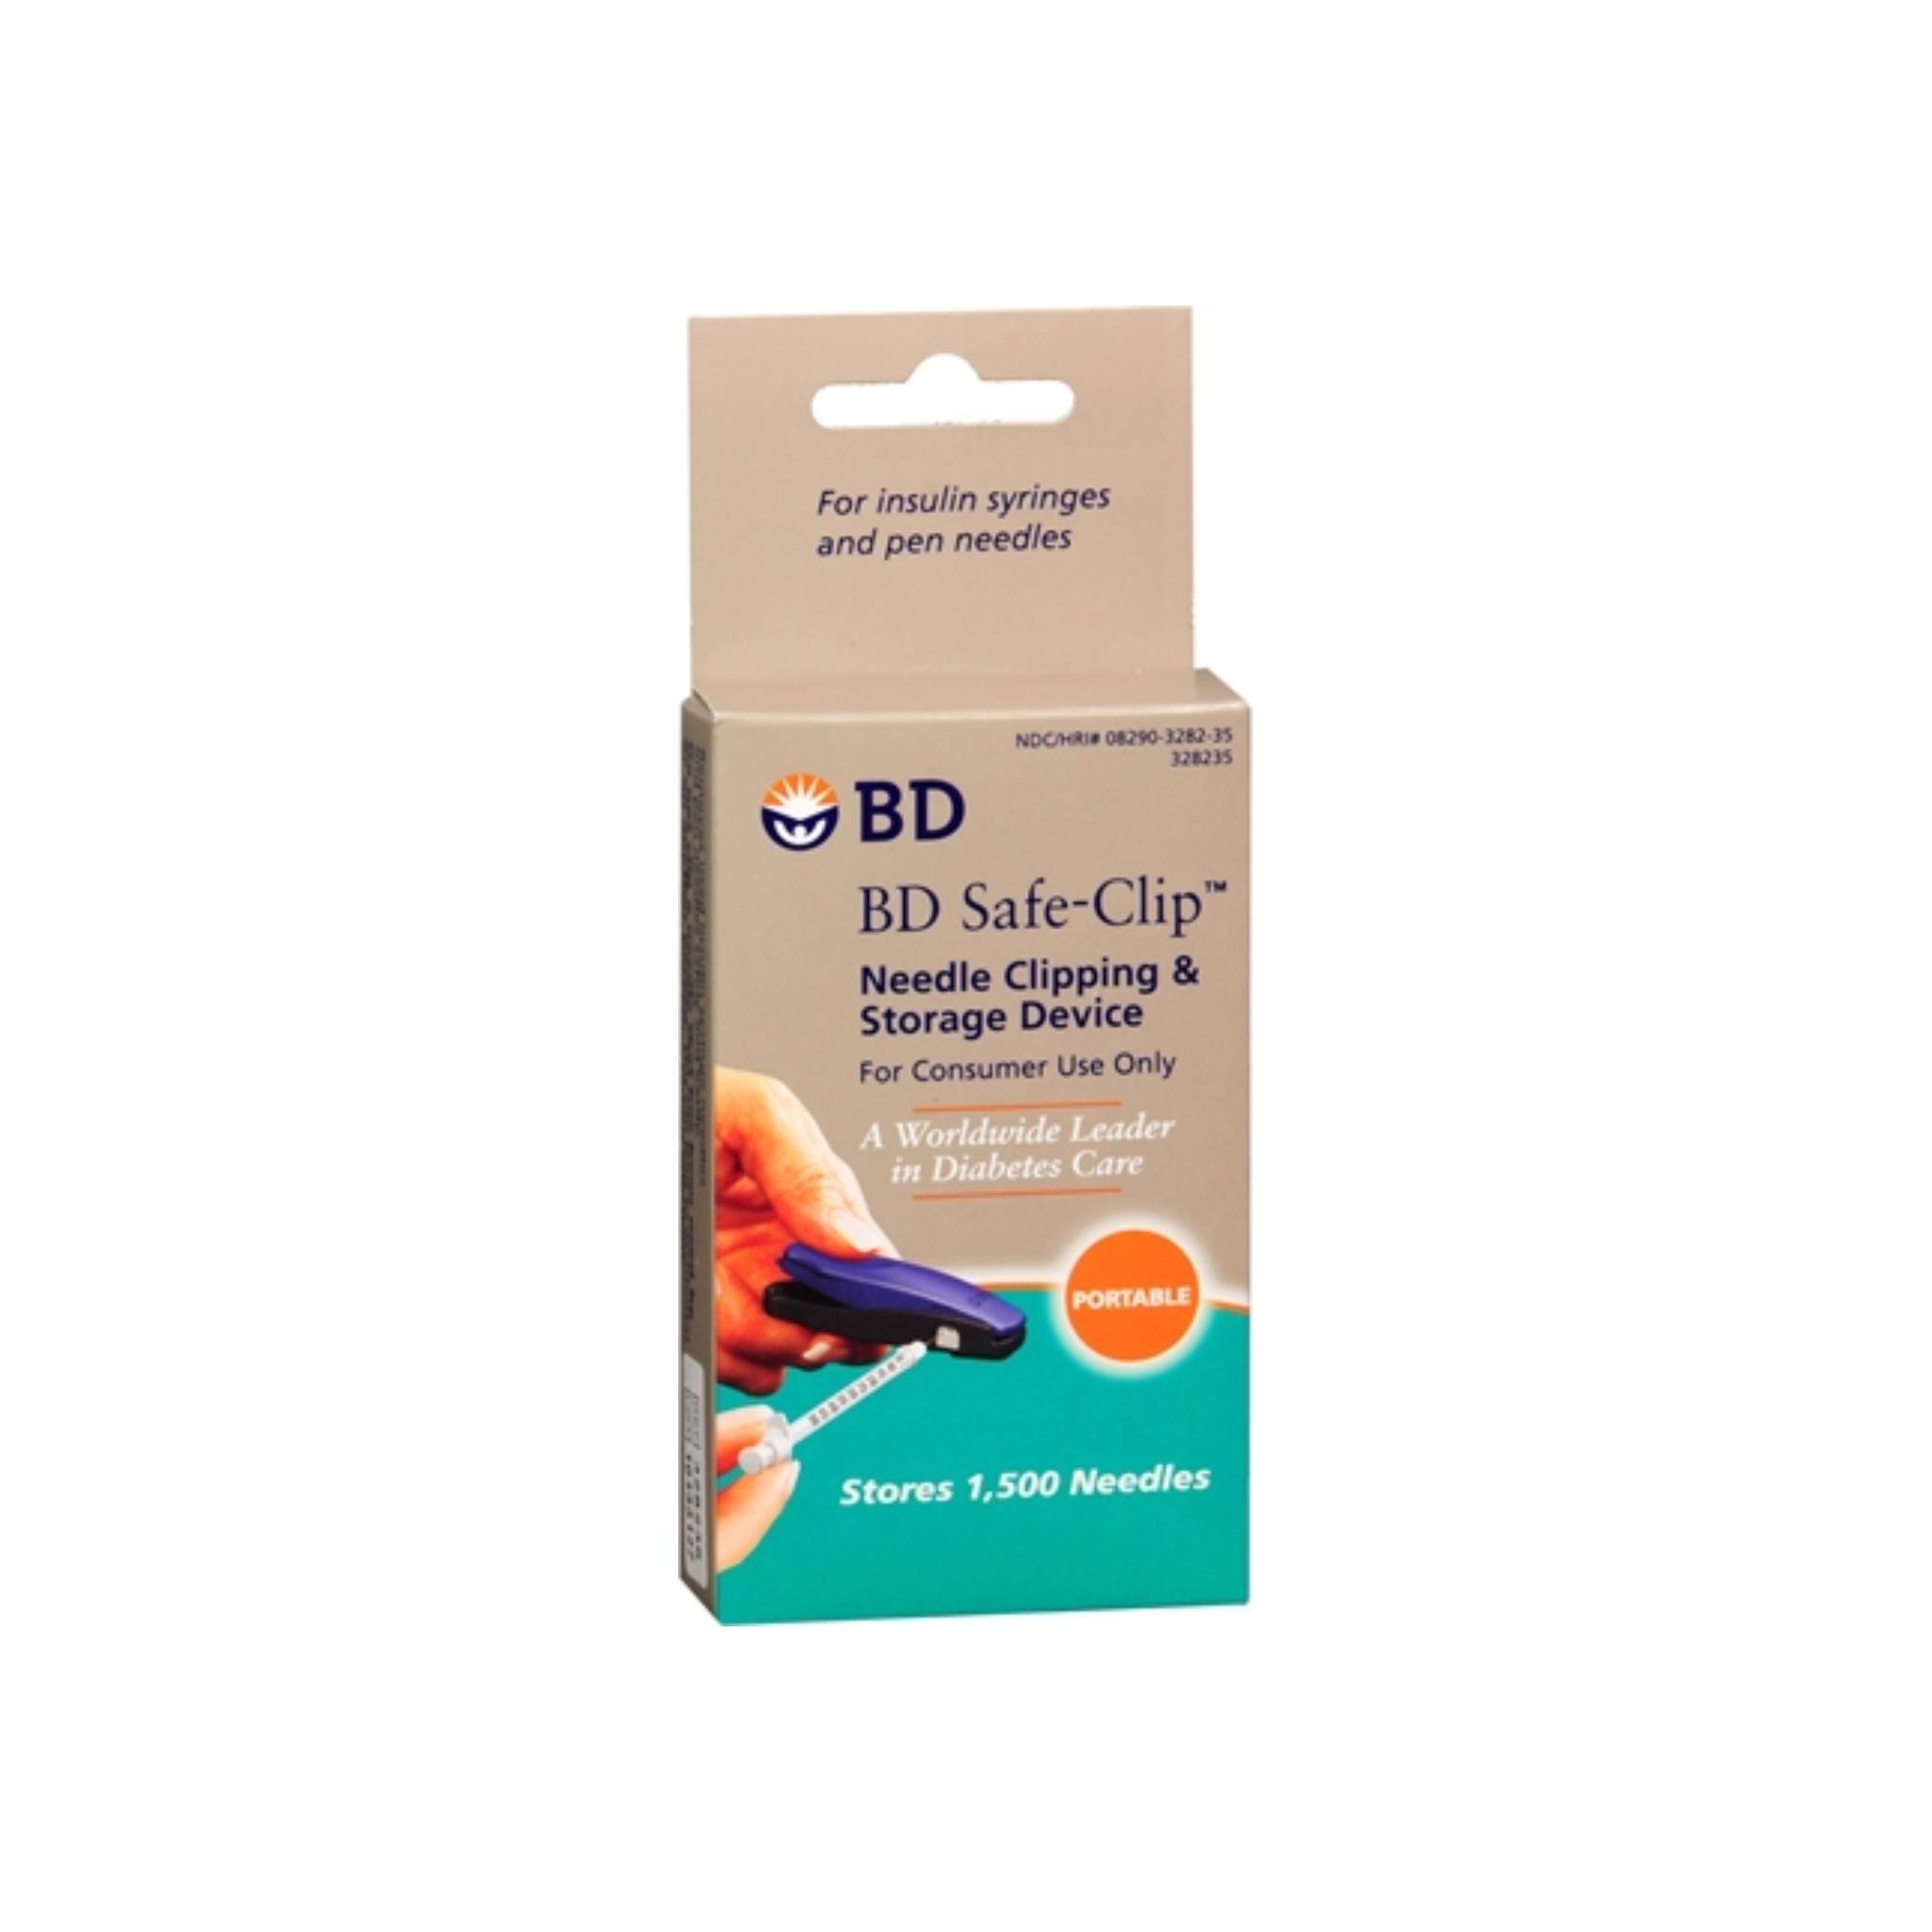 BD Safe-Clip Needle Clipping & Storage Device